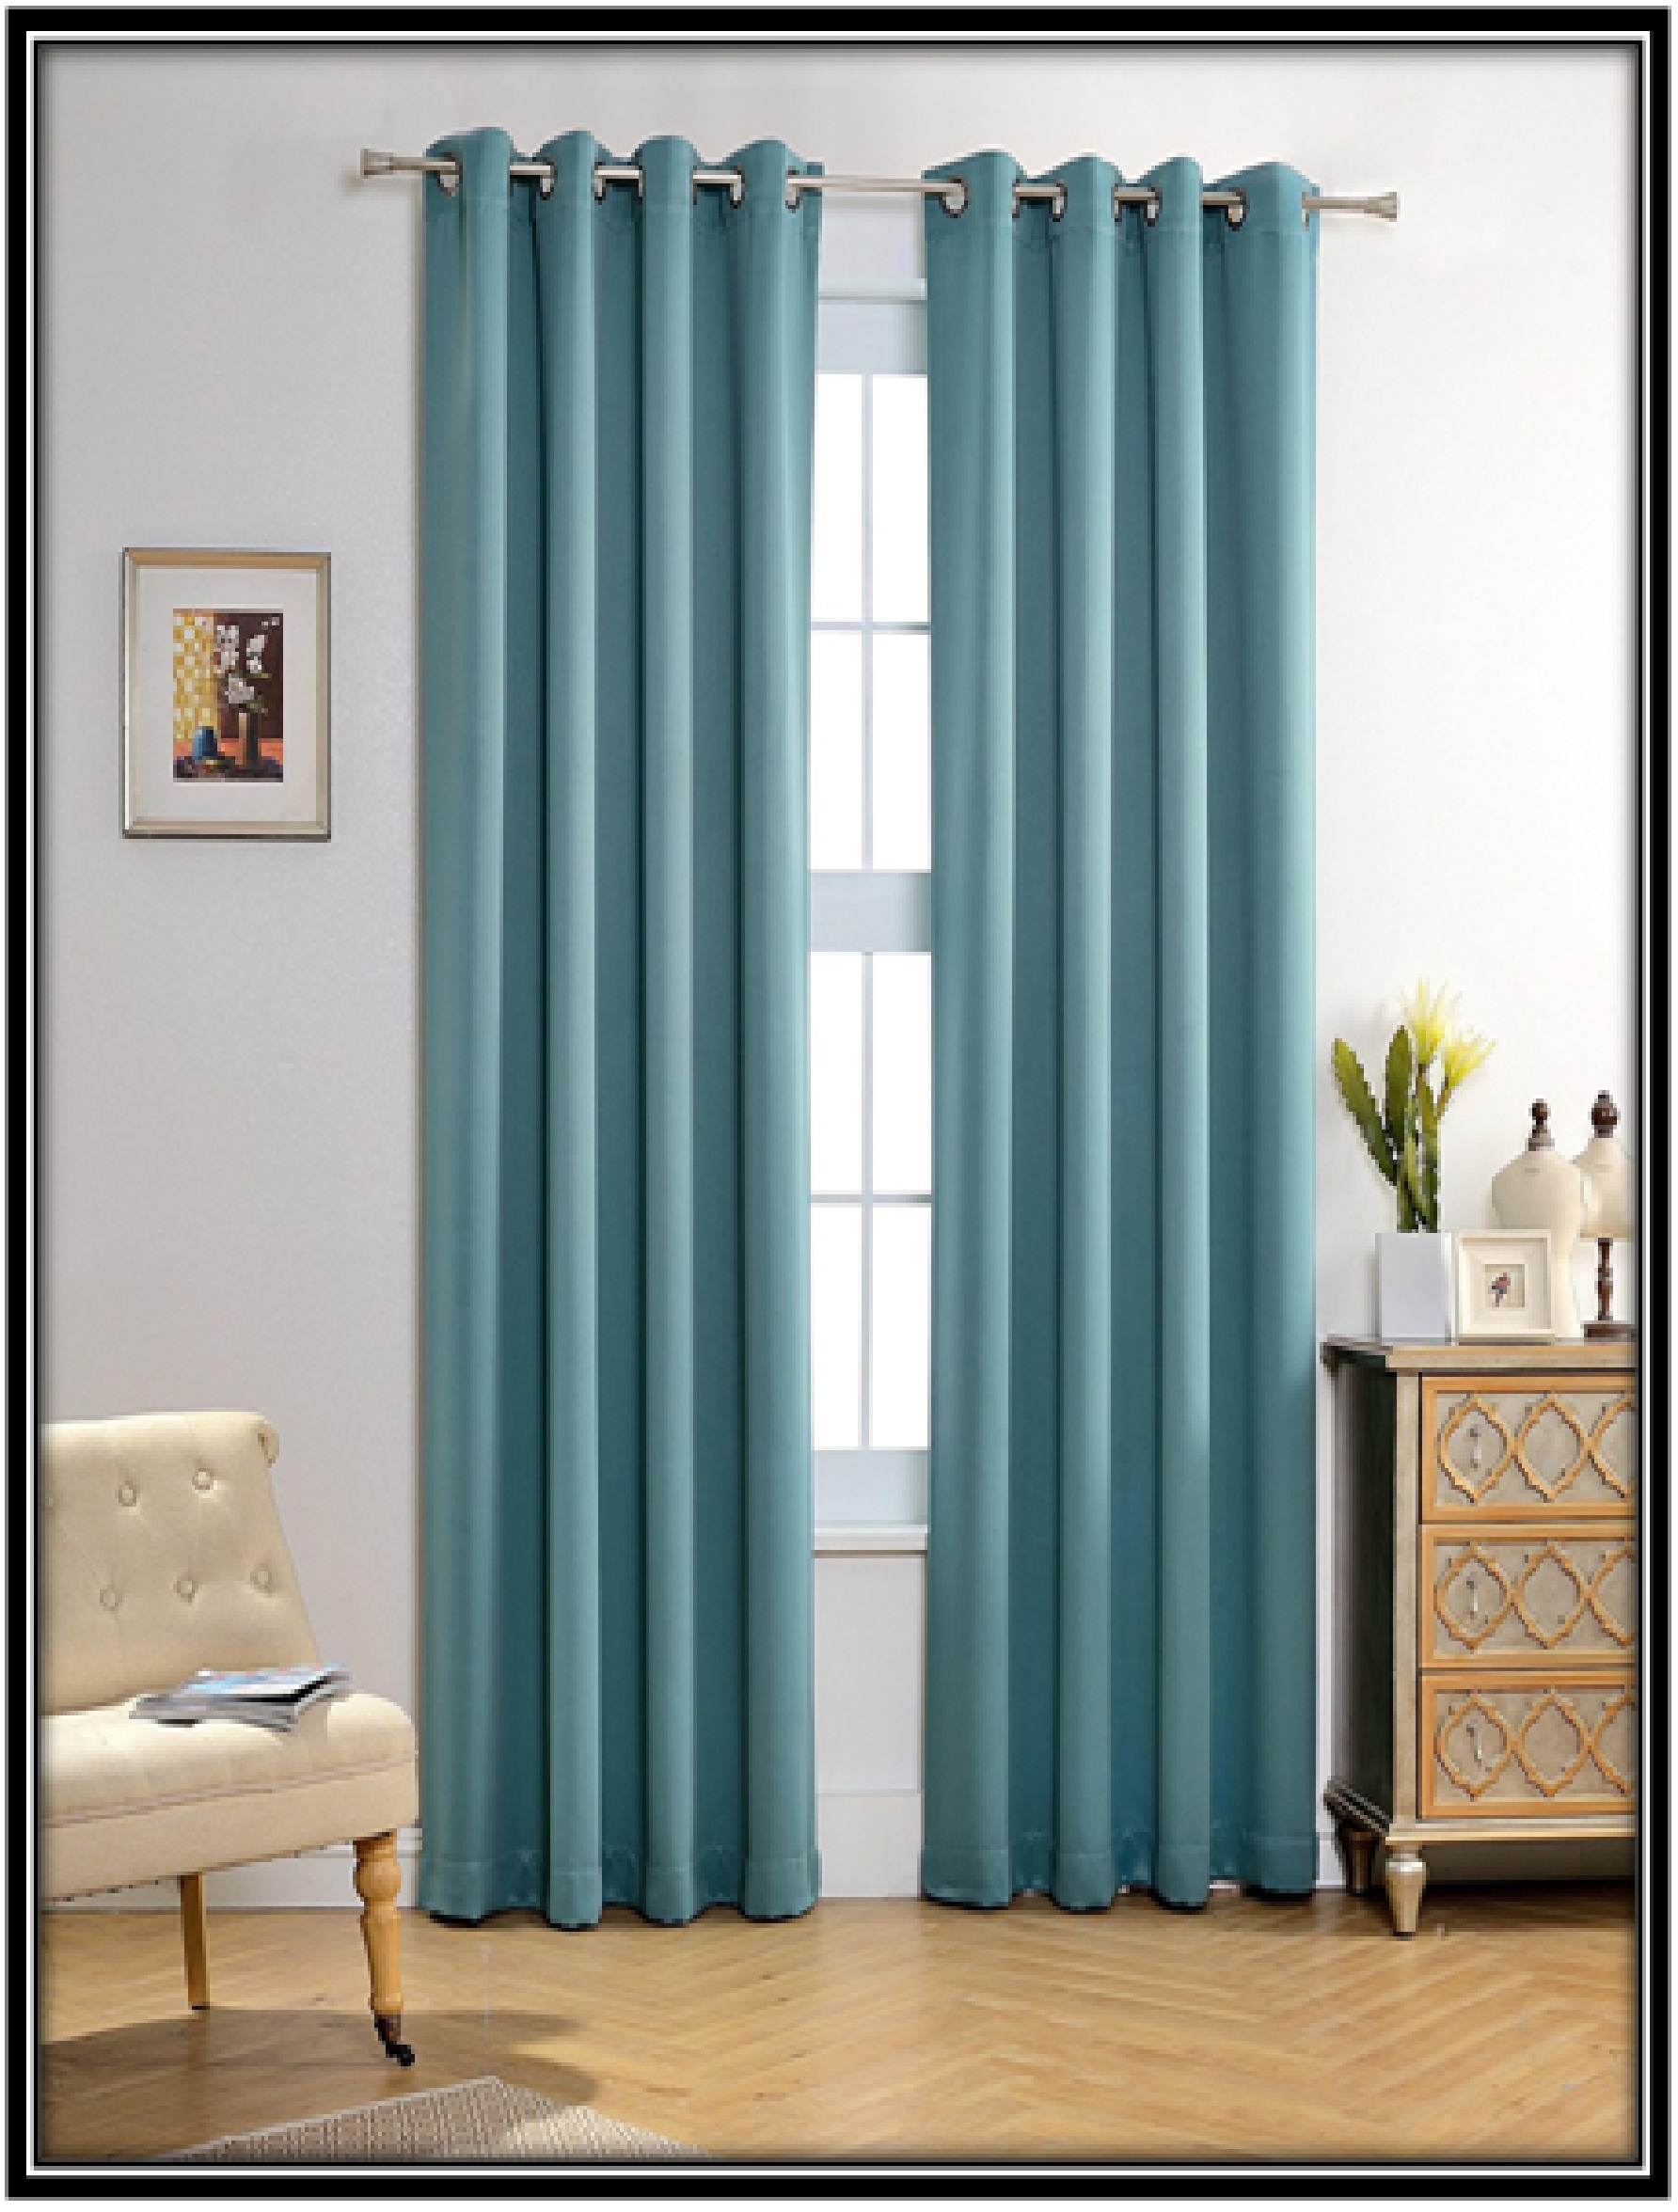 Curtains for the privacy - home decor idea